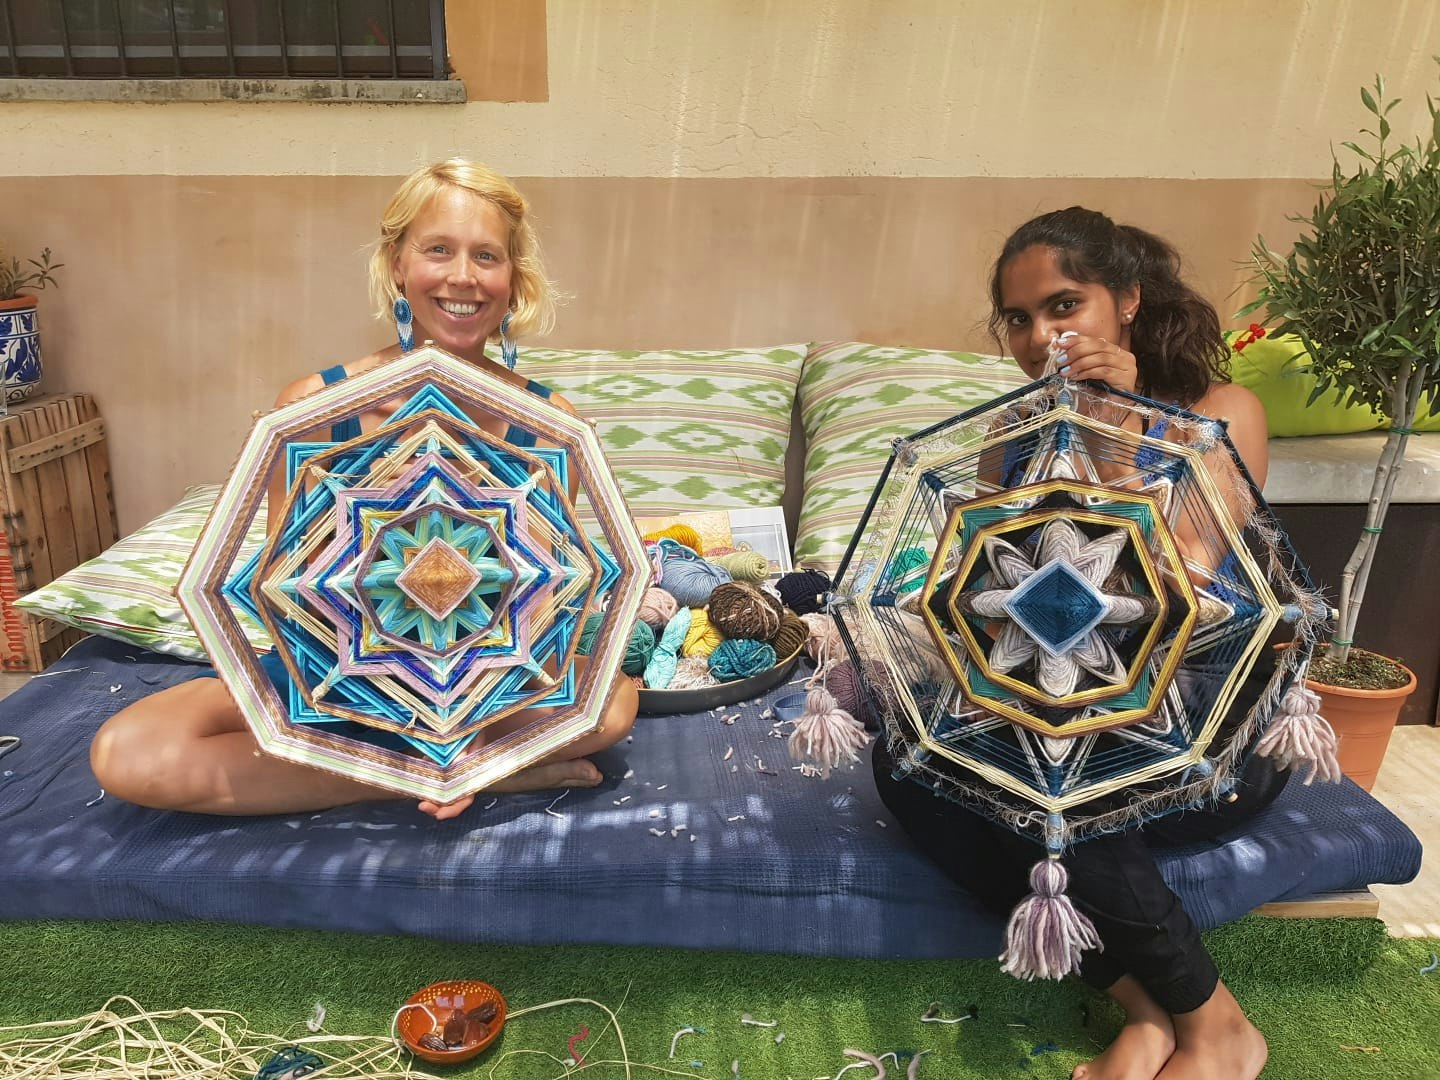 "From Antarctica to Spain: a high school student's story about art, travel and mandala-making | Full story on the Vacation with an Artist blog.  #vawaa #art #artists #mandala #creativity #travel #spain #education #craft #solotravel #highschool"